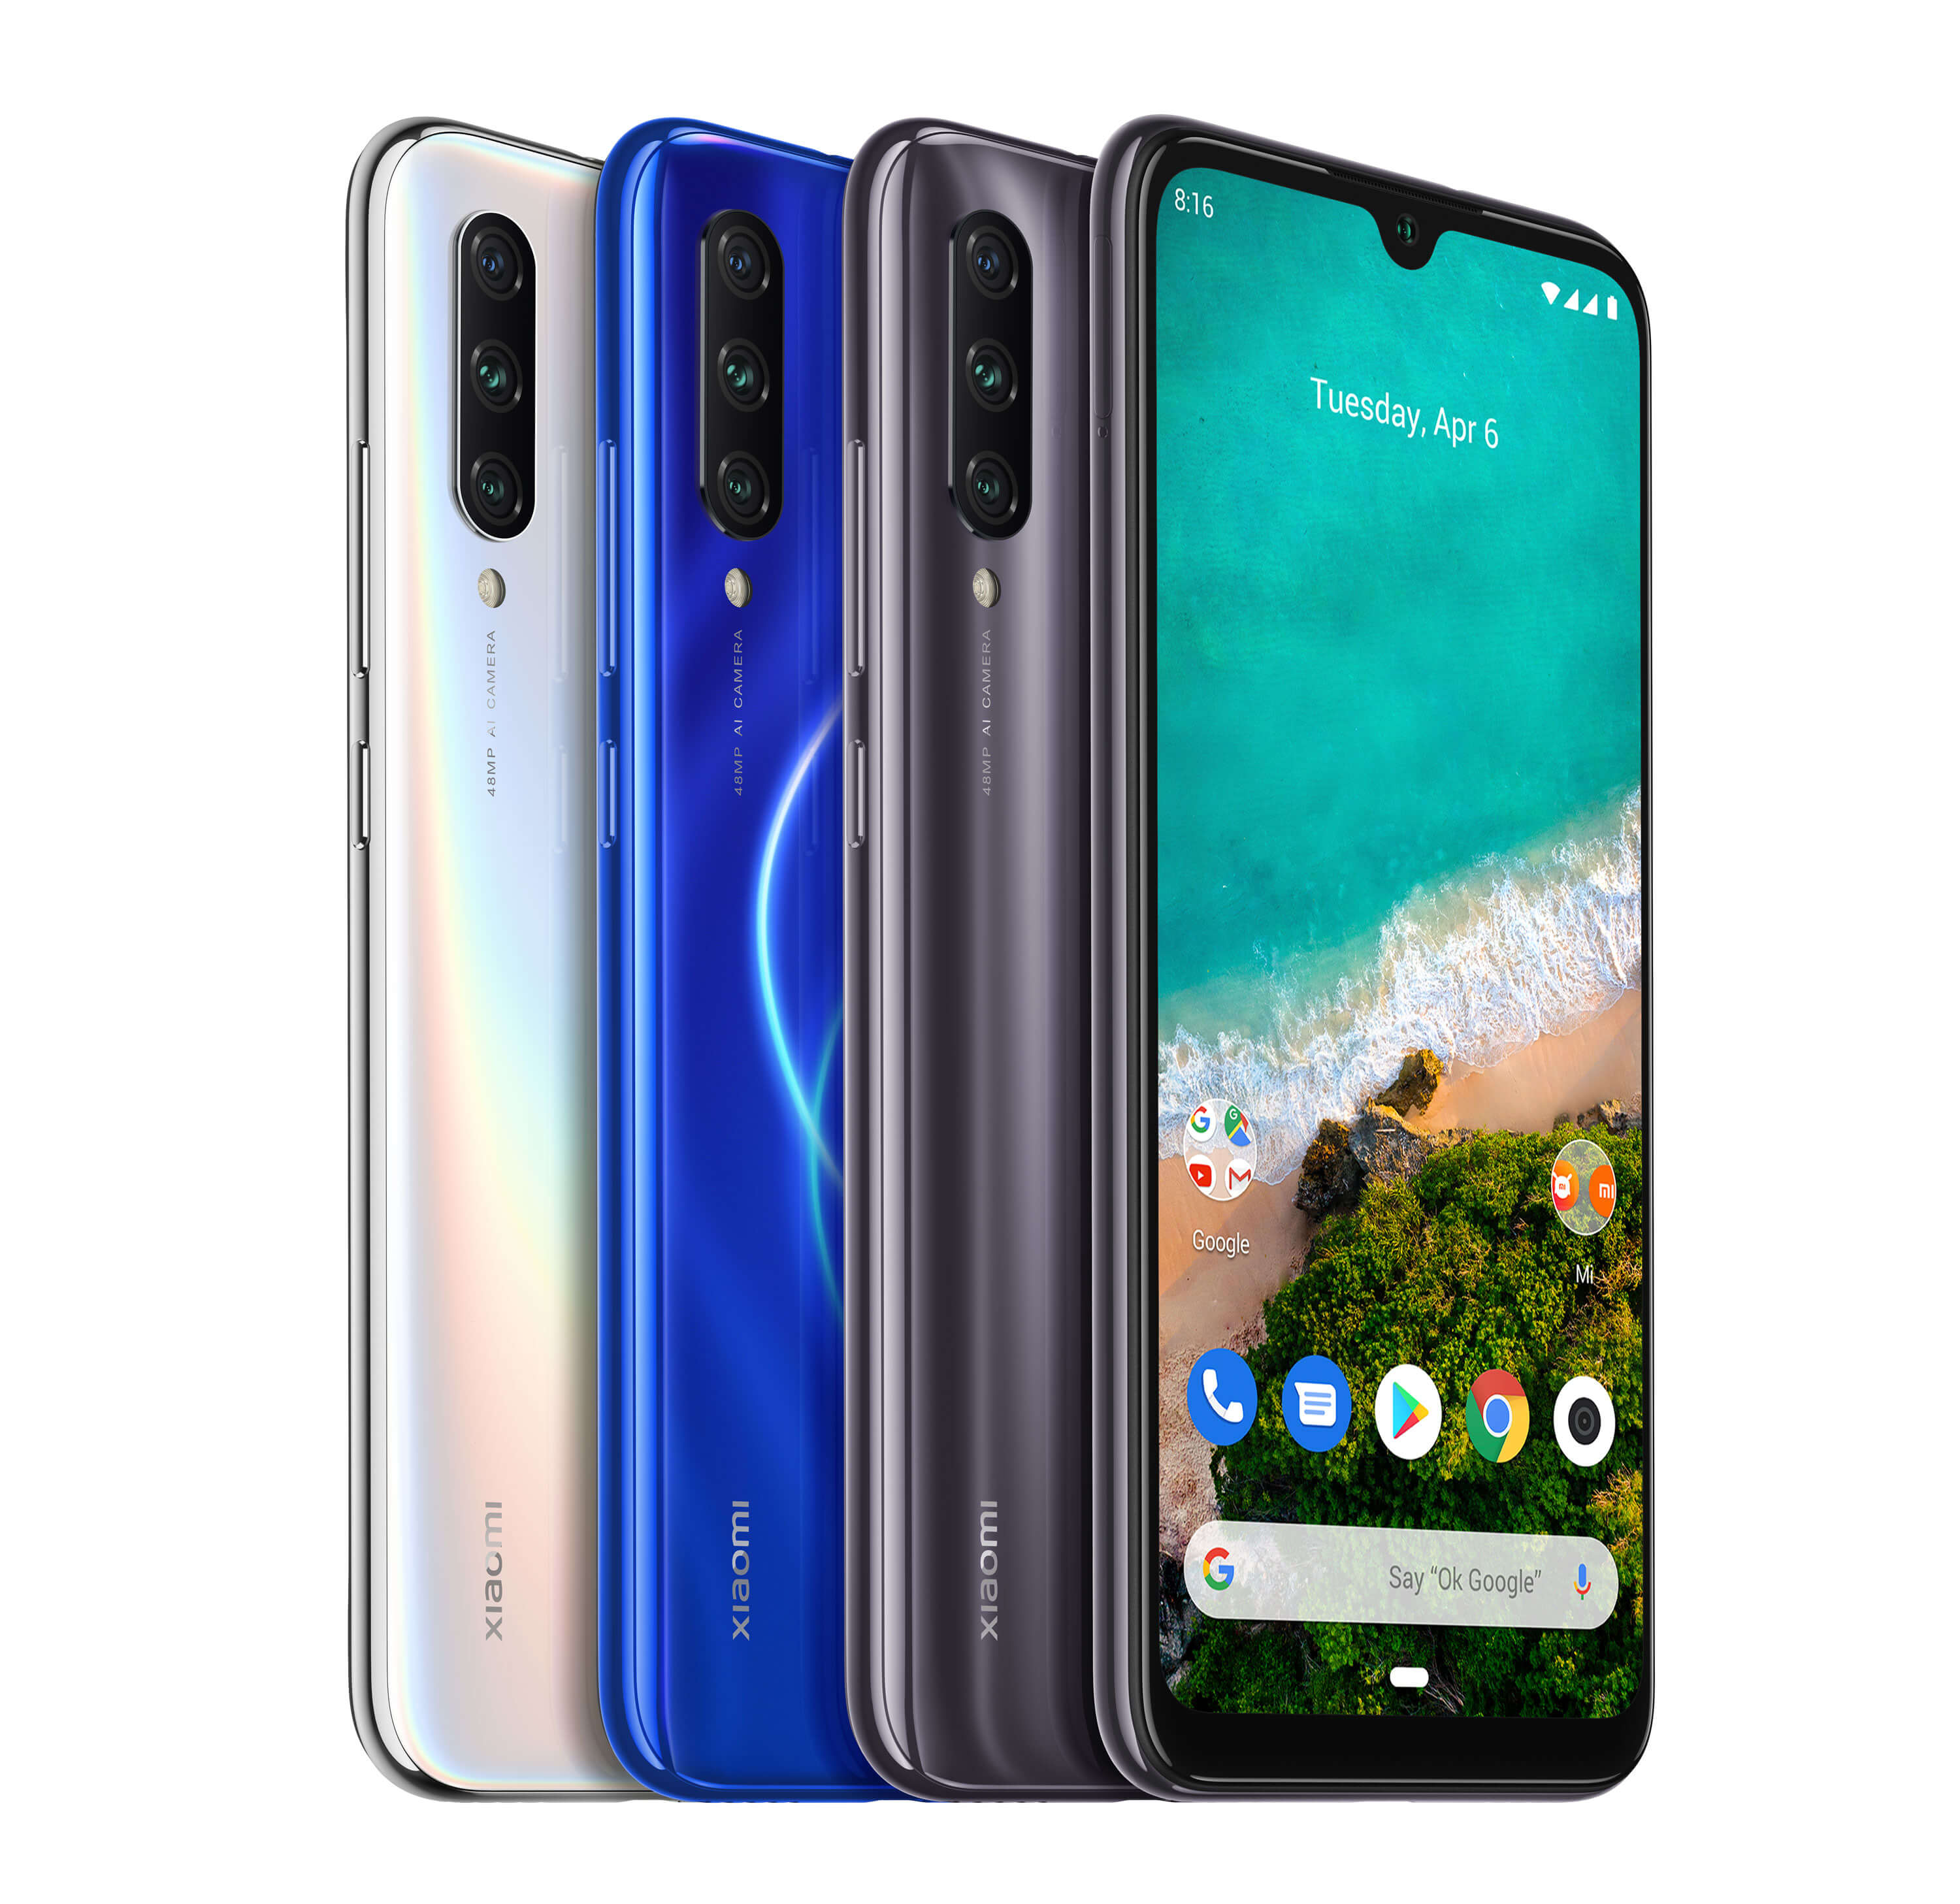 MI A3 CAMERA. Mi A3 sports a triple camera setup on the back with 48MP main lens and a large 1/2” sensor for ultra-high-resolution day photos. Its 8MP ultra-wide angle lens intelligently detects when users are shooting large images and recommends when to switch to ultra-wide angle mode for a more optimal shot.